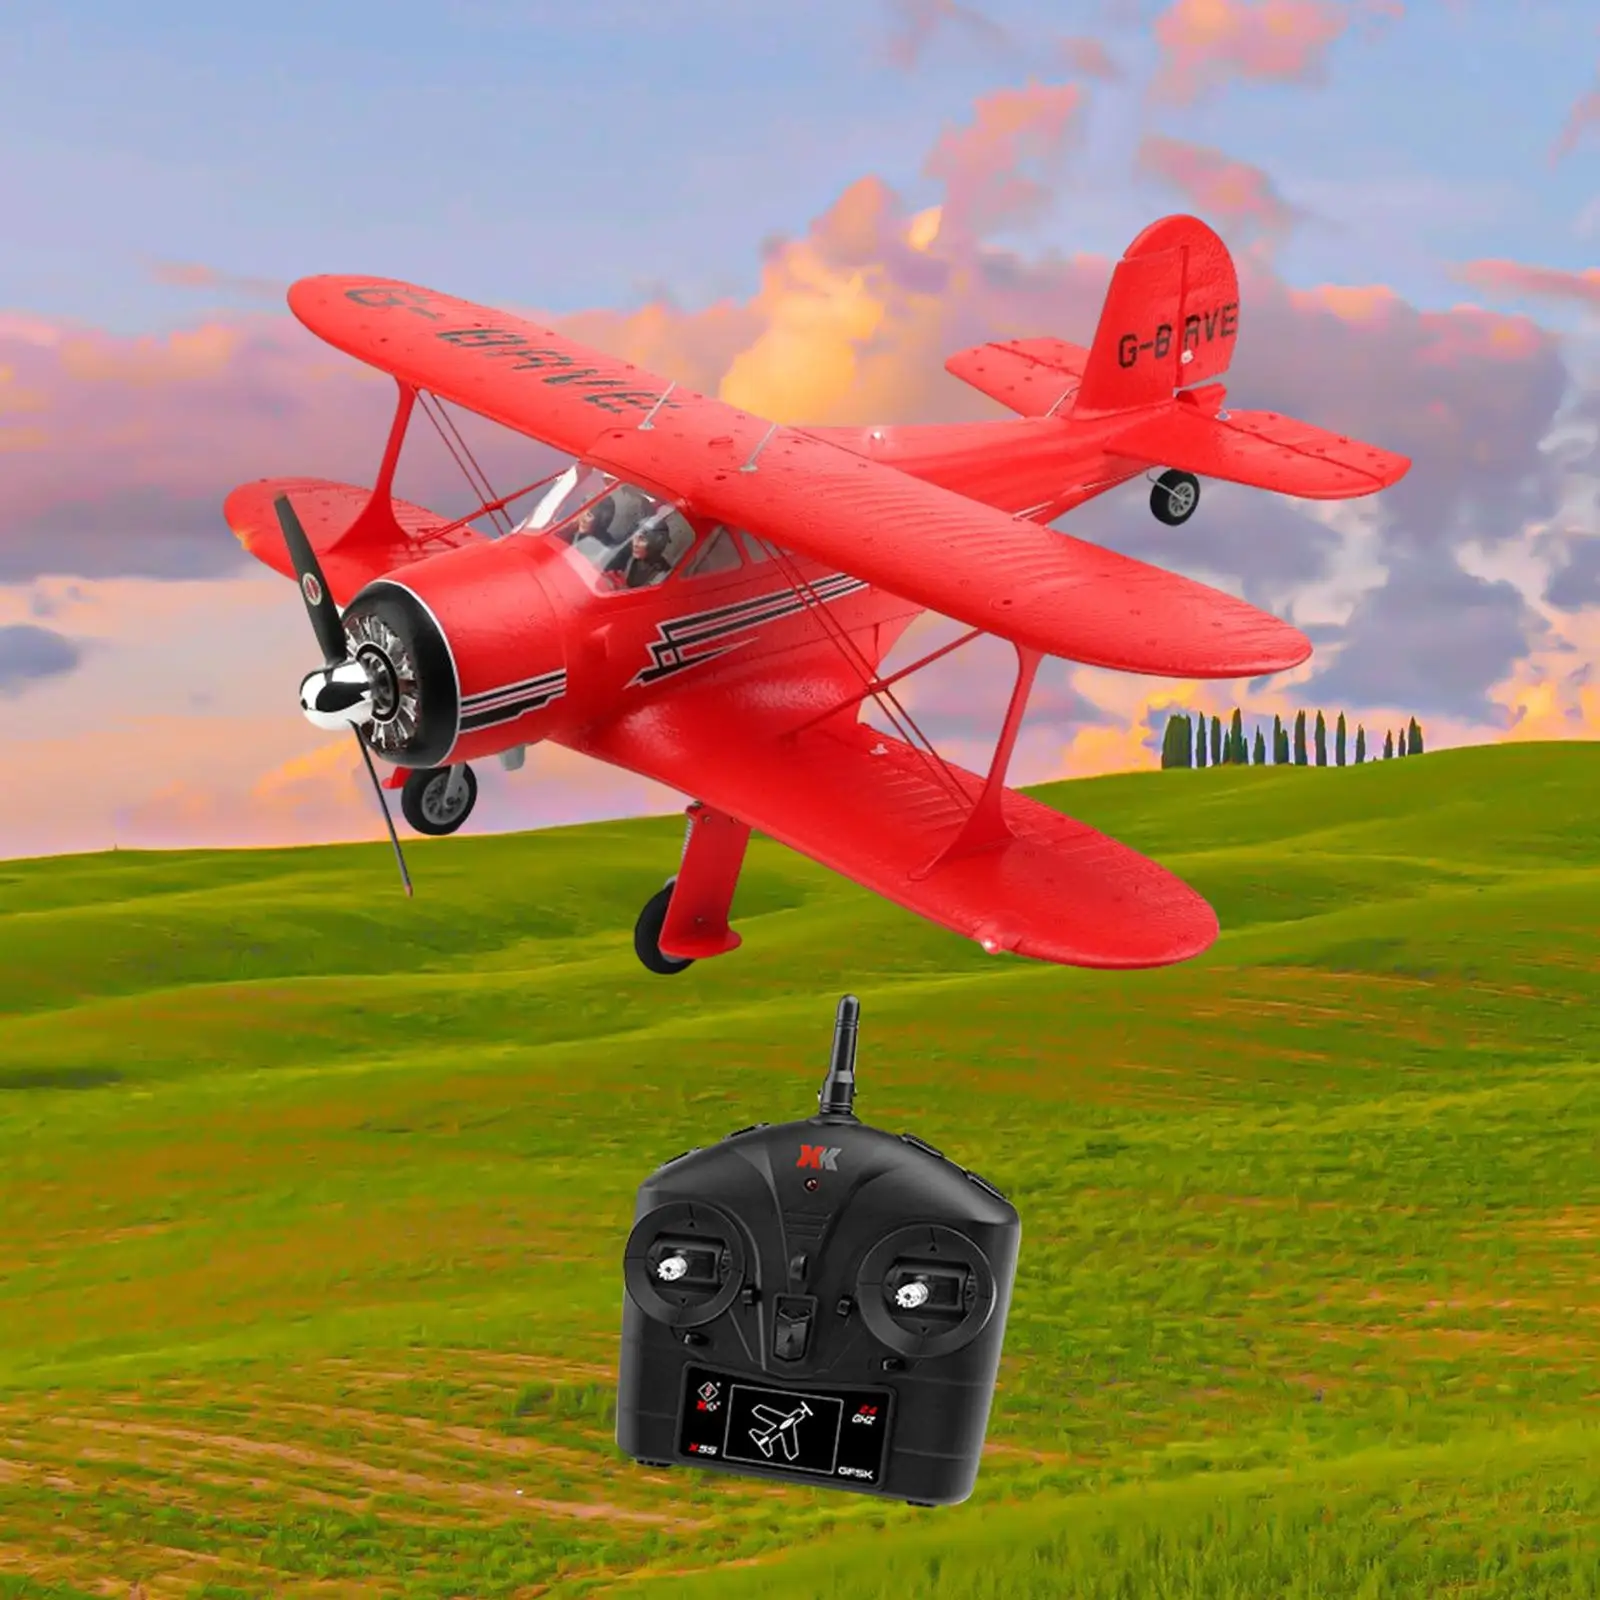 RC Glider Foam Easy to Fly 150M Remote Control Distance Remote Control Aircraft for Boy Gift for Kids and Adults Outdoor Toys